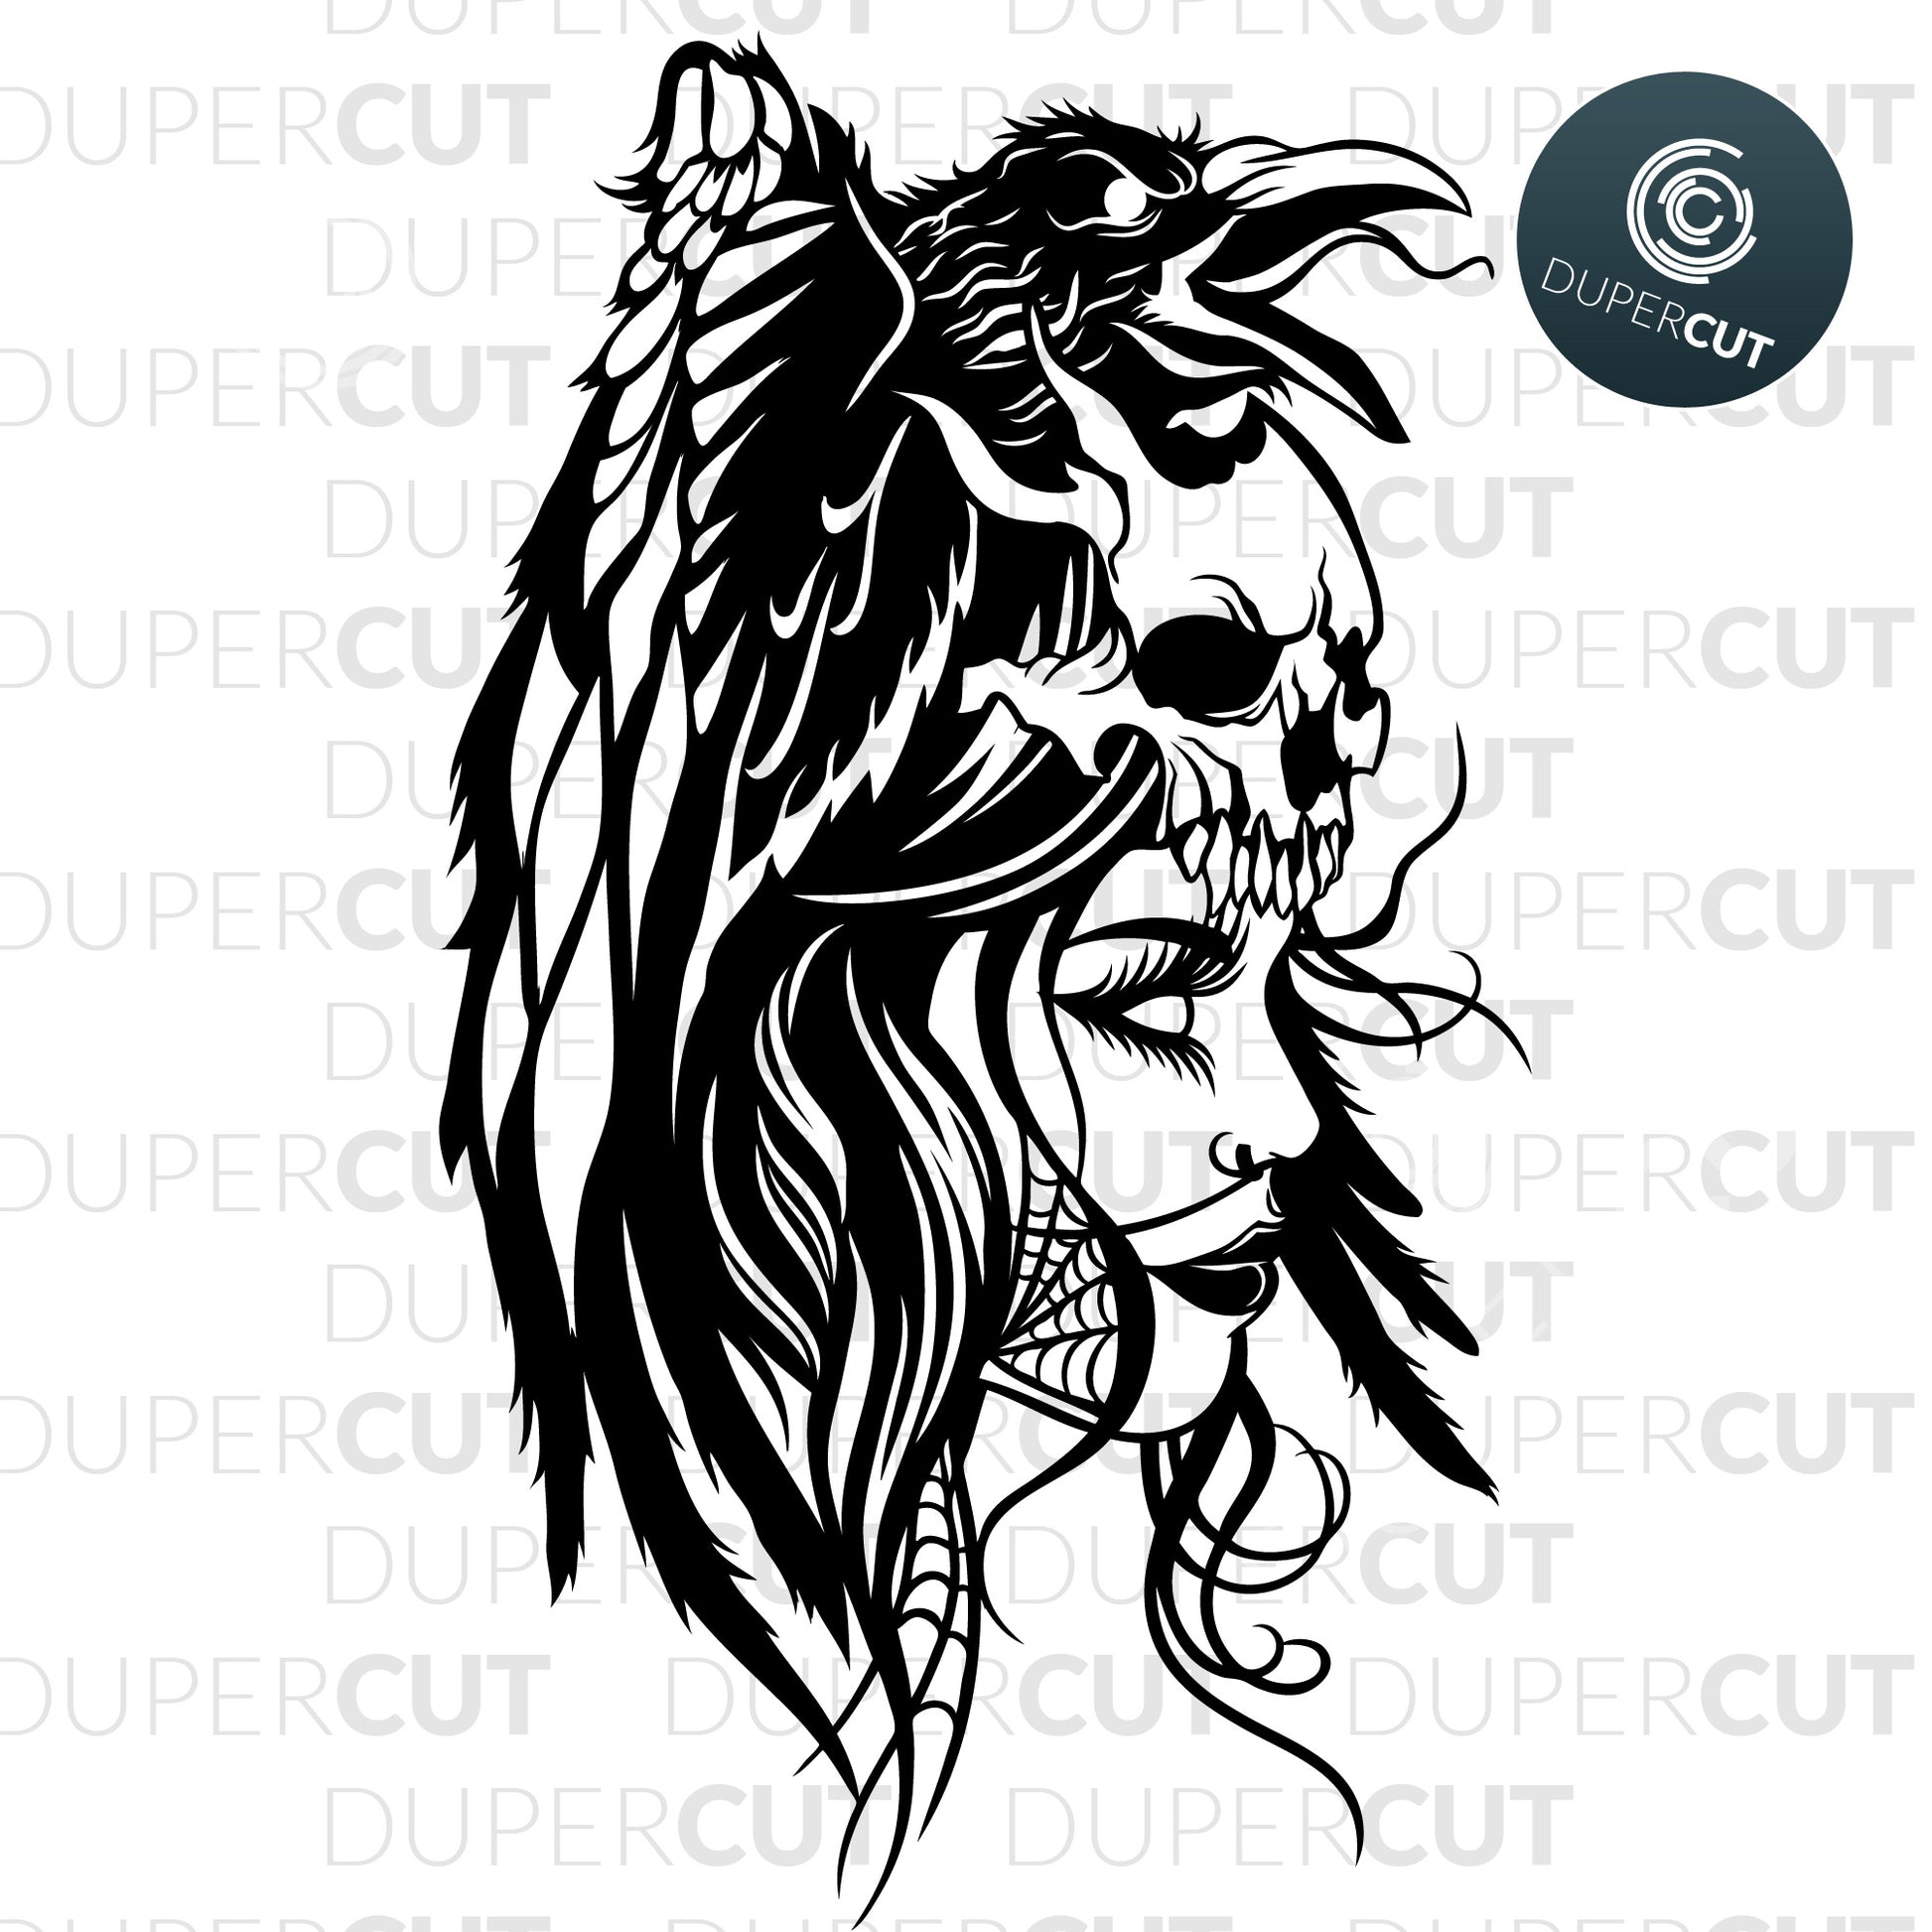 Morrigan Crow Queen black and white steampunk  illustration. SVG JPEG DXF files. Template for paper cutting, laser, print on demand. For use with Cricut, Glowforge, Silhouette Cameo, CNC machines. Personal or commercial license.